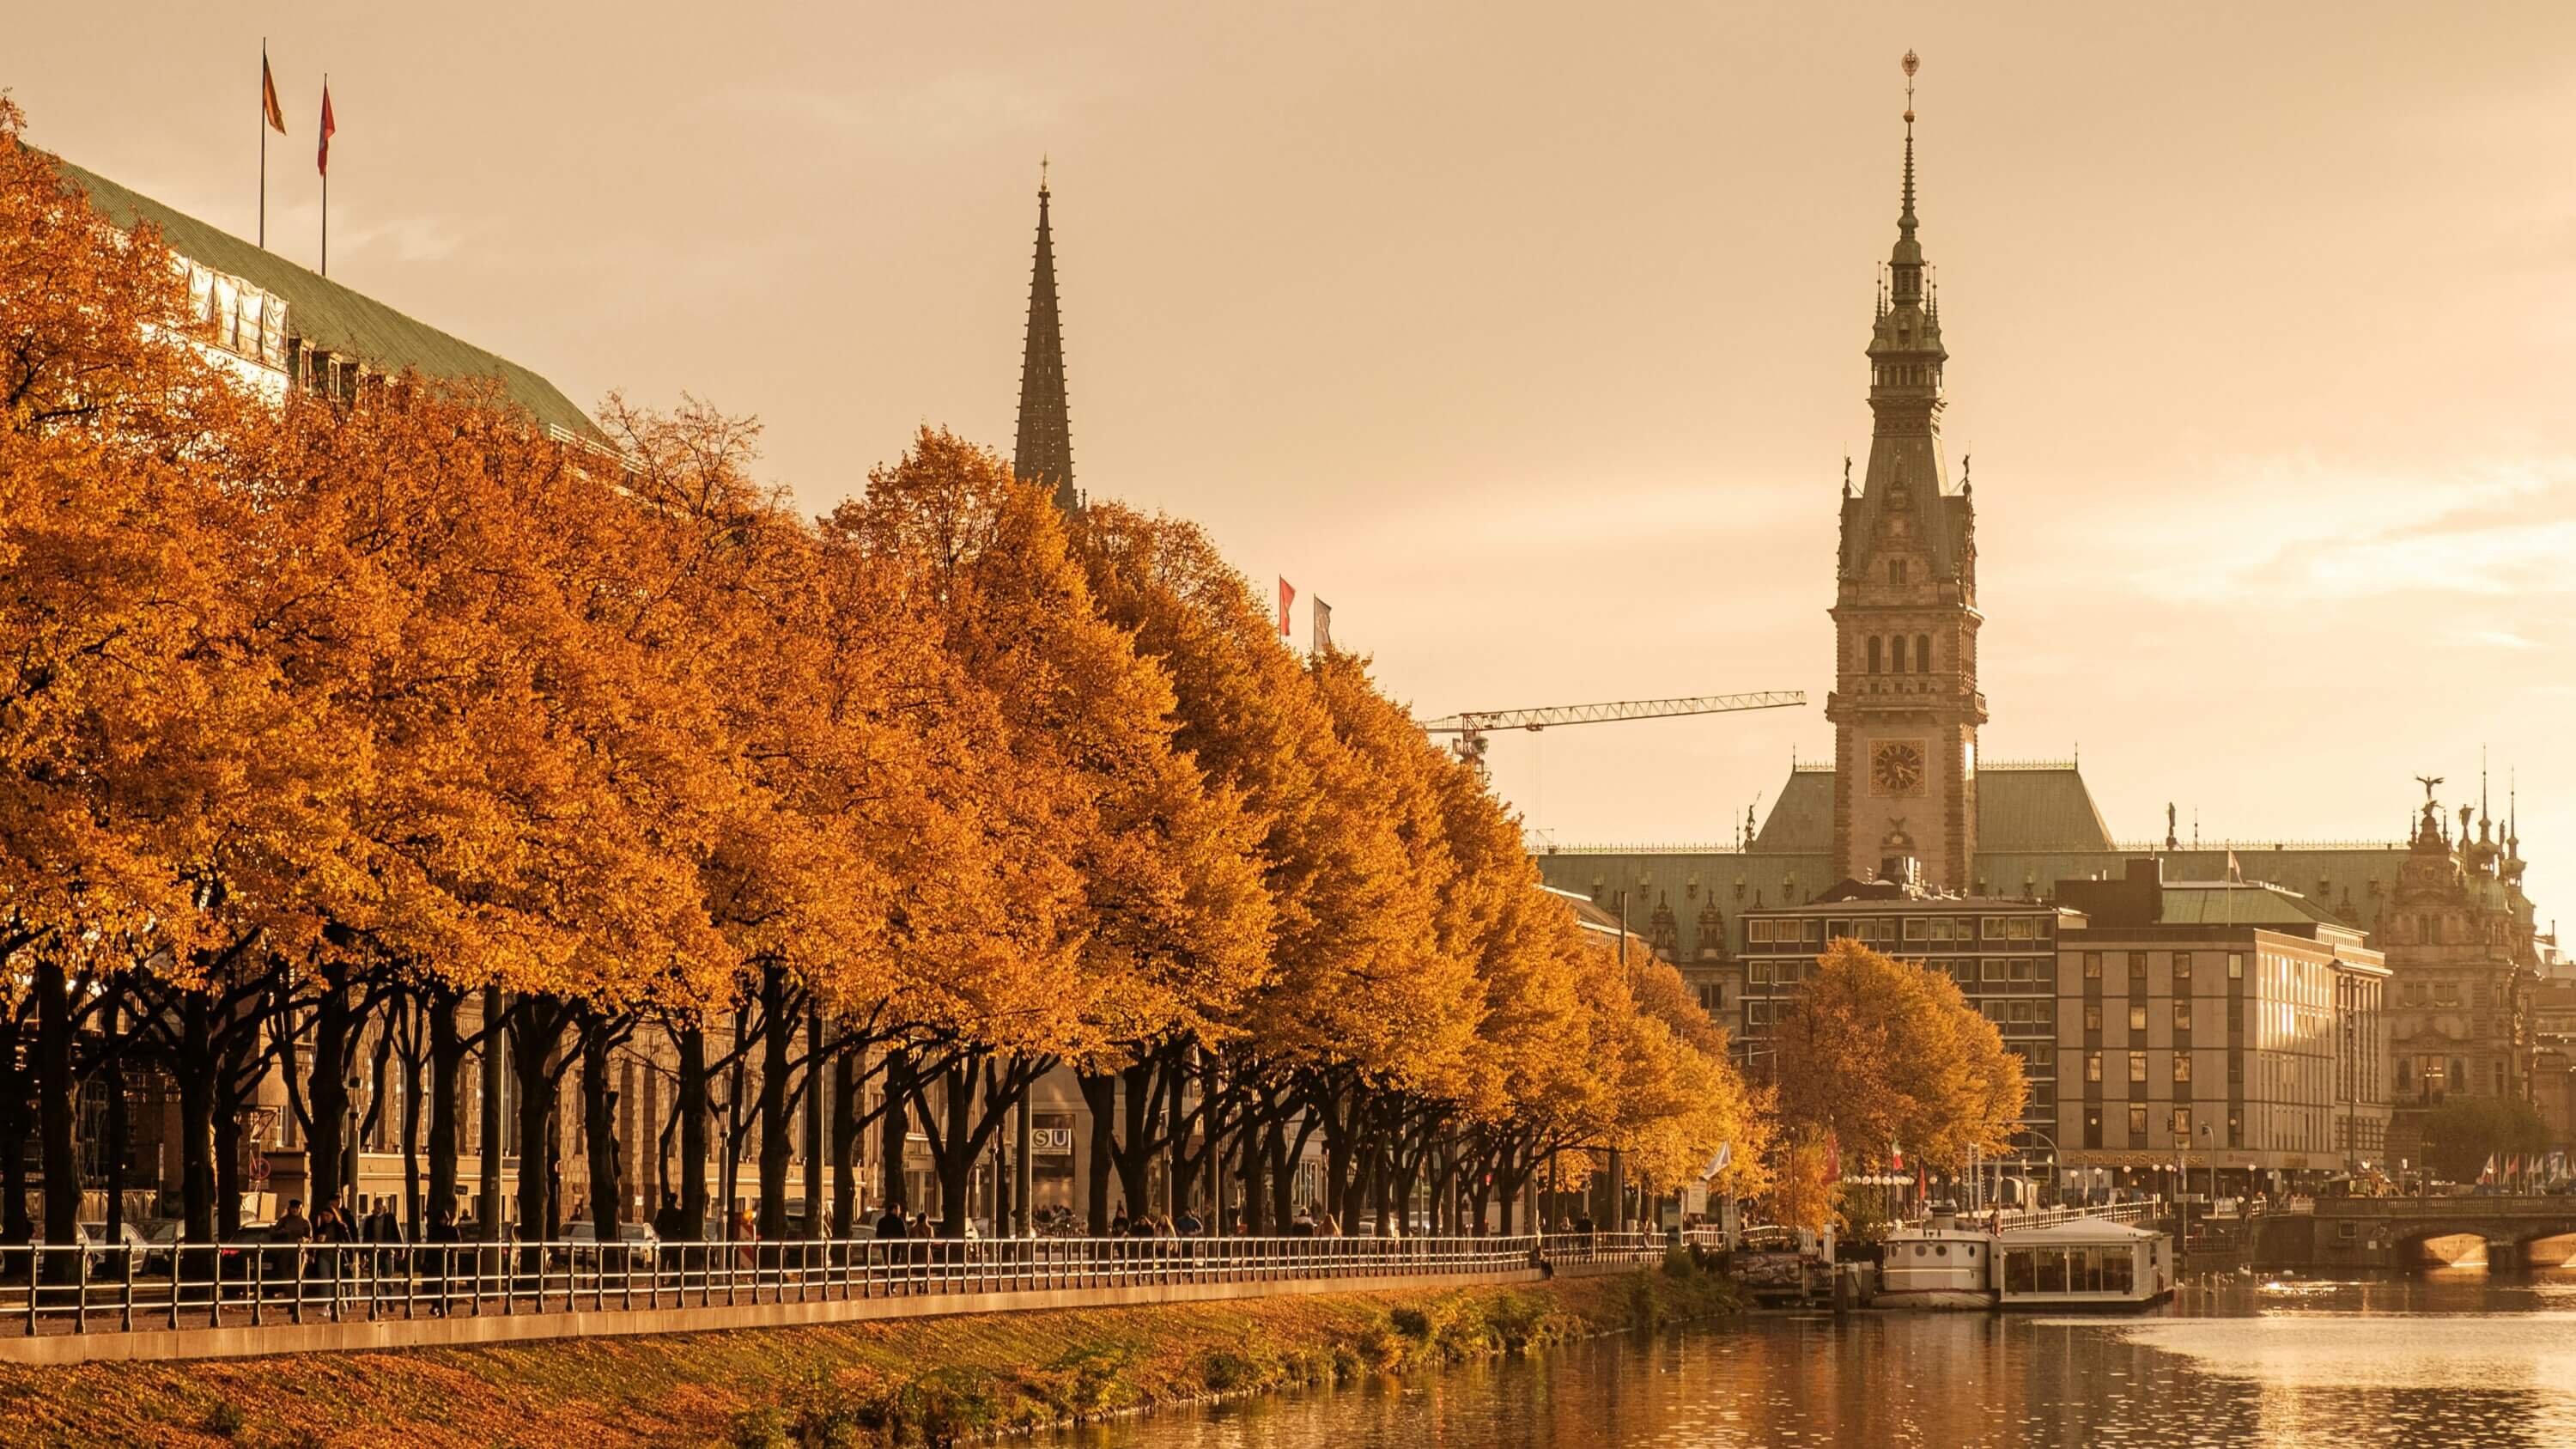 A view of Hamburg city hall from a distance with trees and river in the foreground